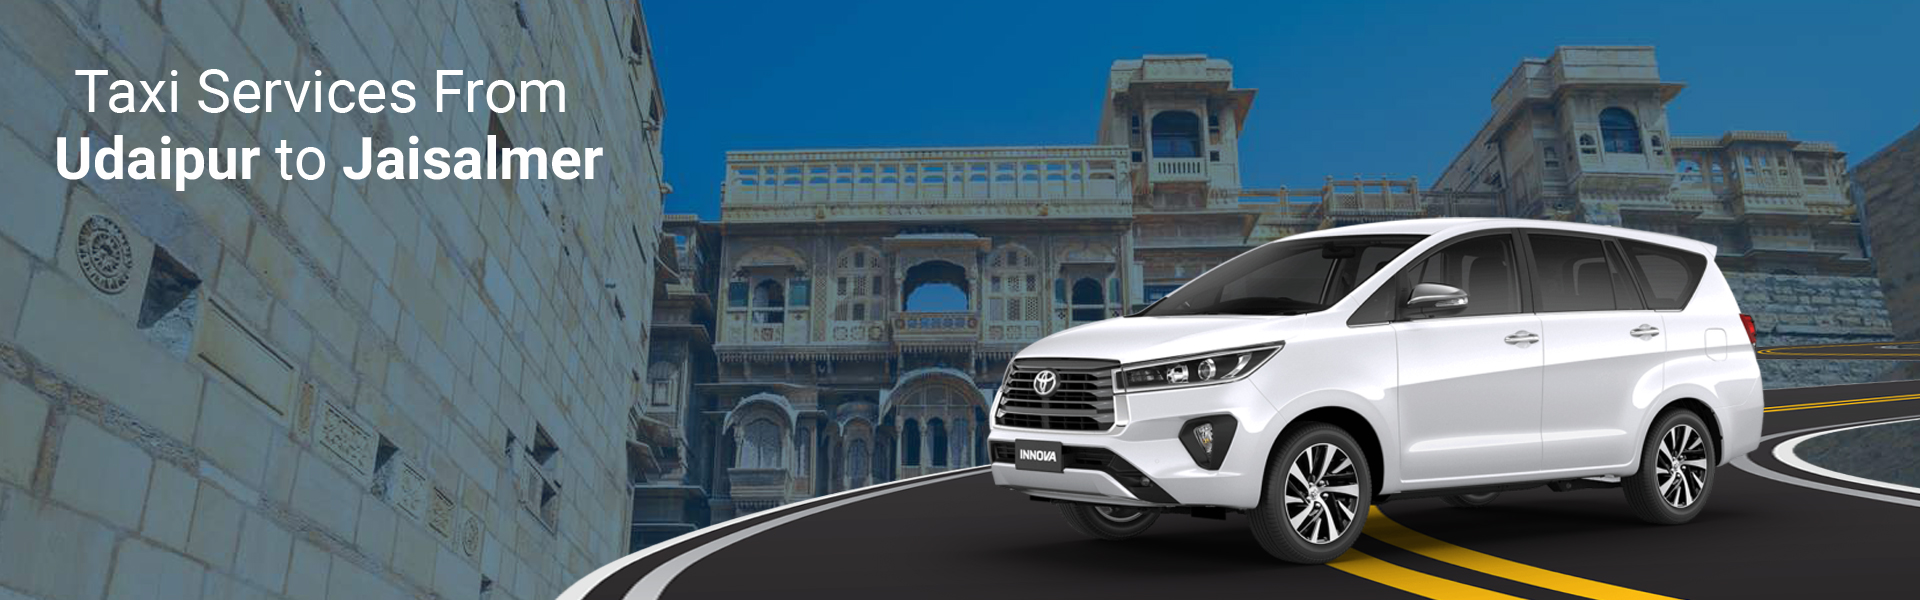 Taxi Services From Udaipur to Jaisalmer